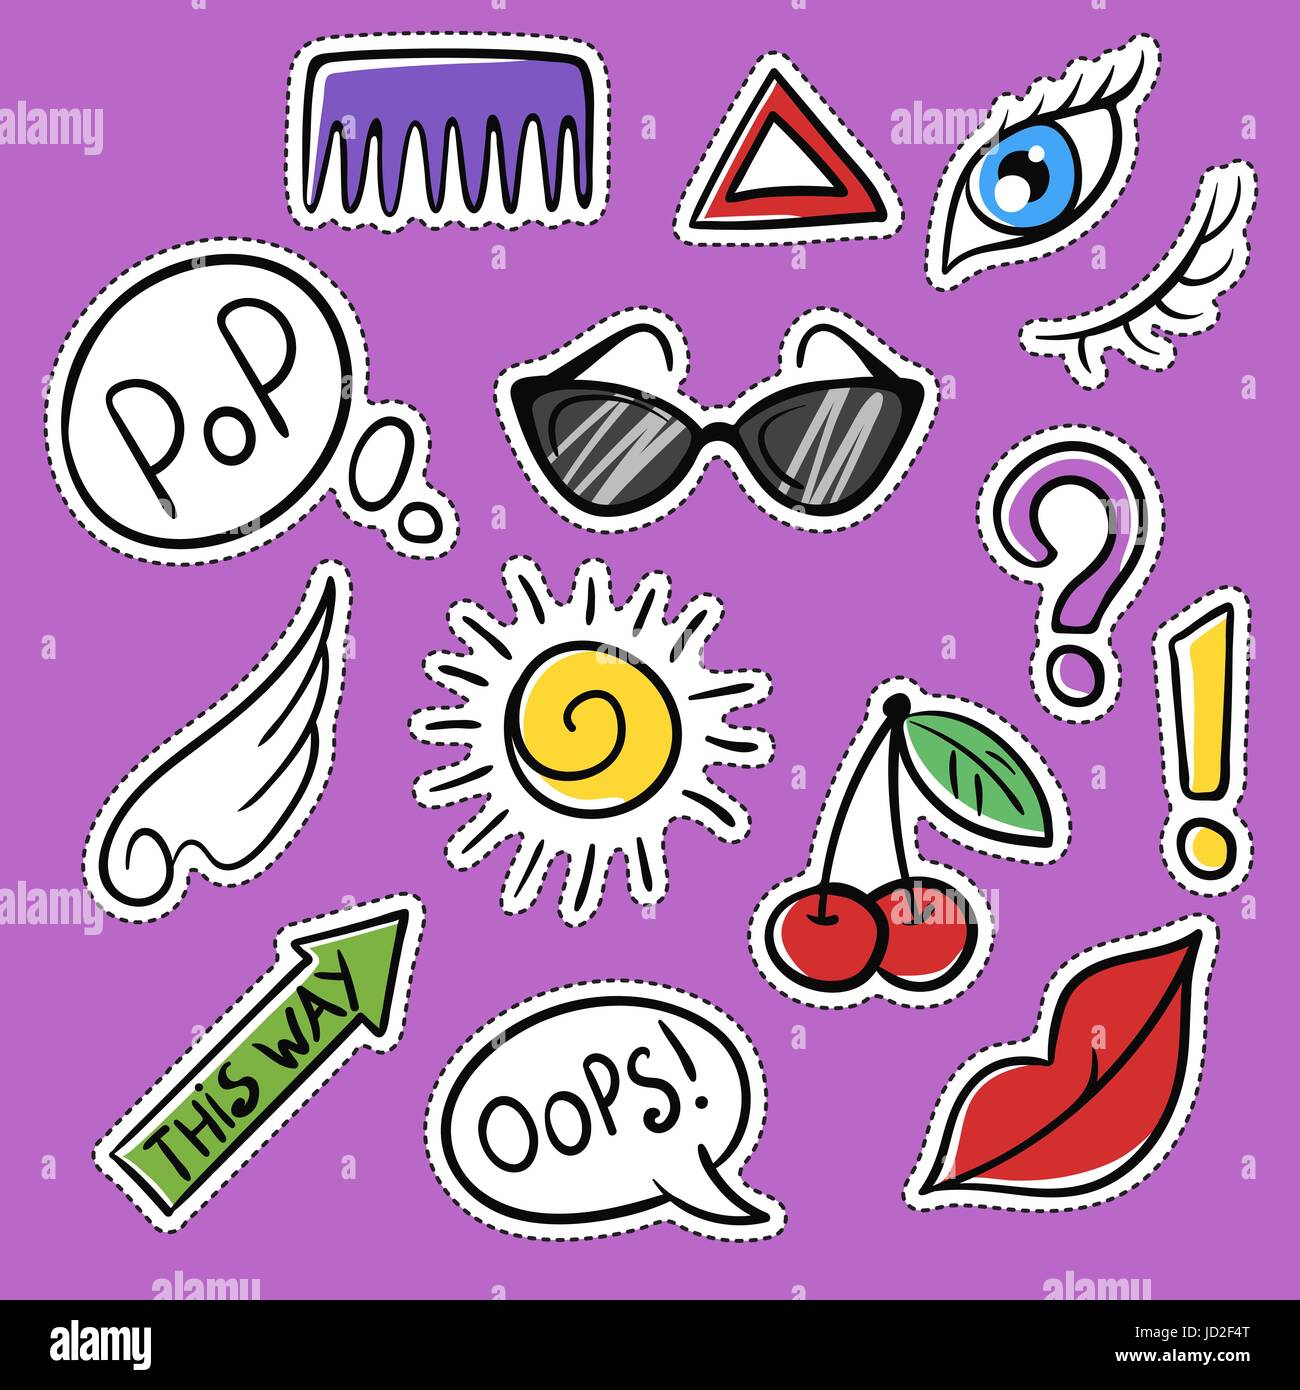 Vector set of fashionable patches: eye, cherry, sun, glasses. Modern doodle pop art sketch pins and badges. Hand drawn cute and funny fashion stickers Stock Vector